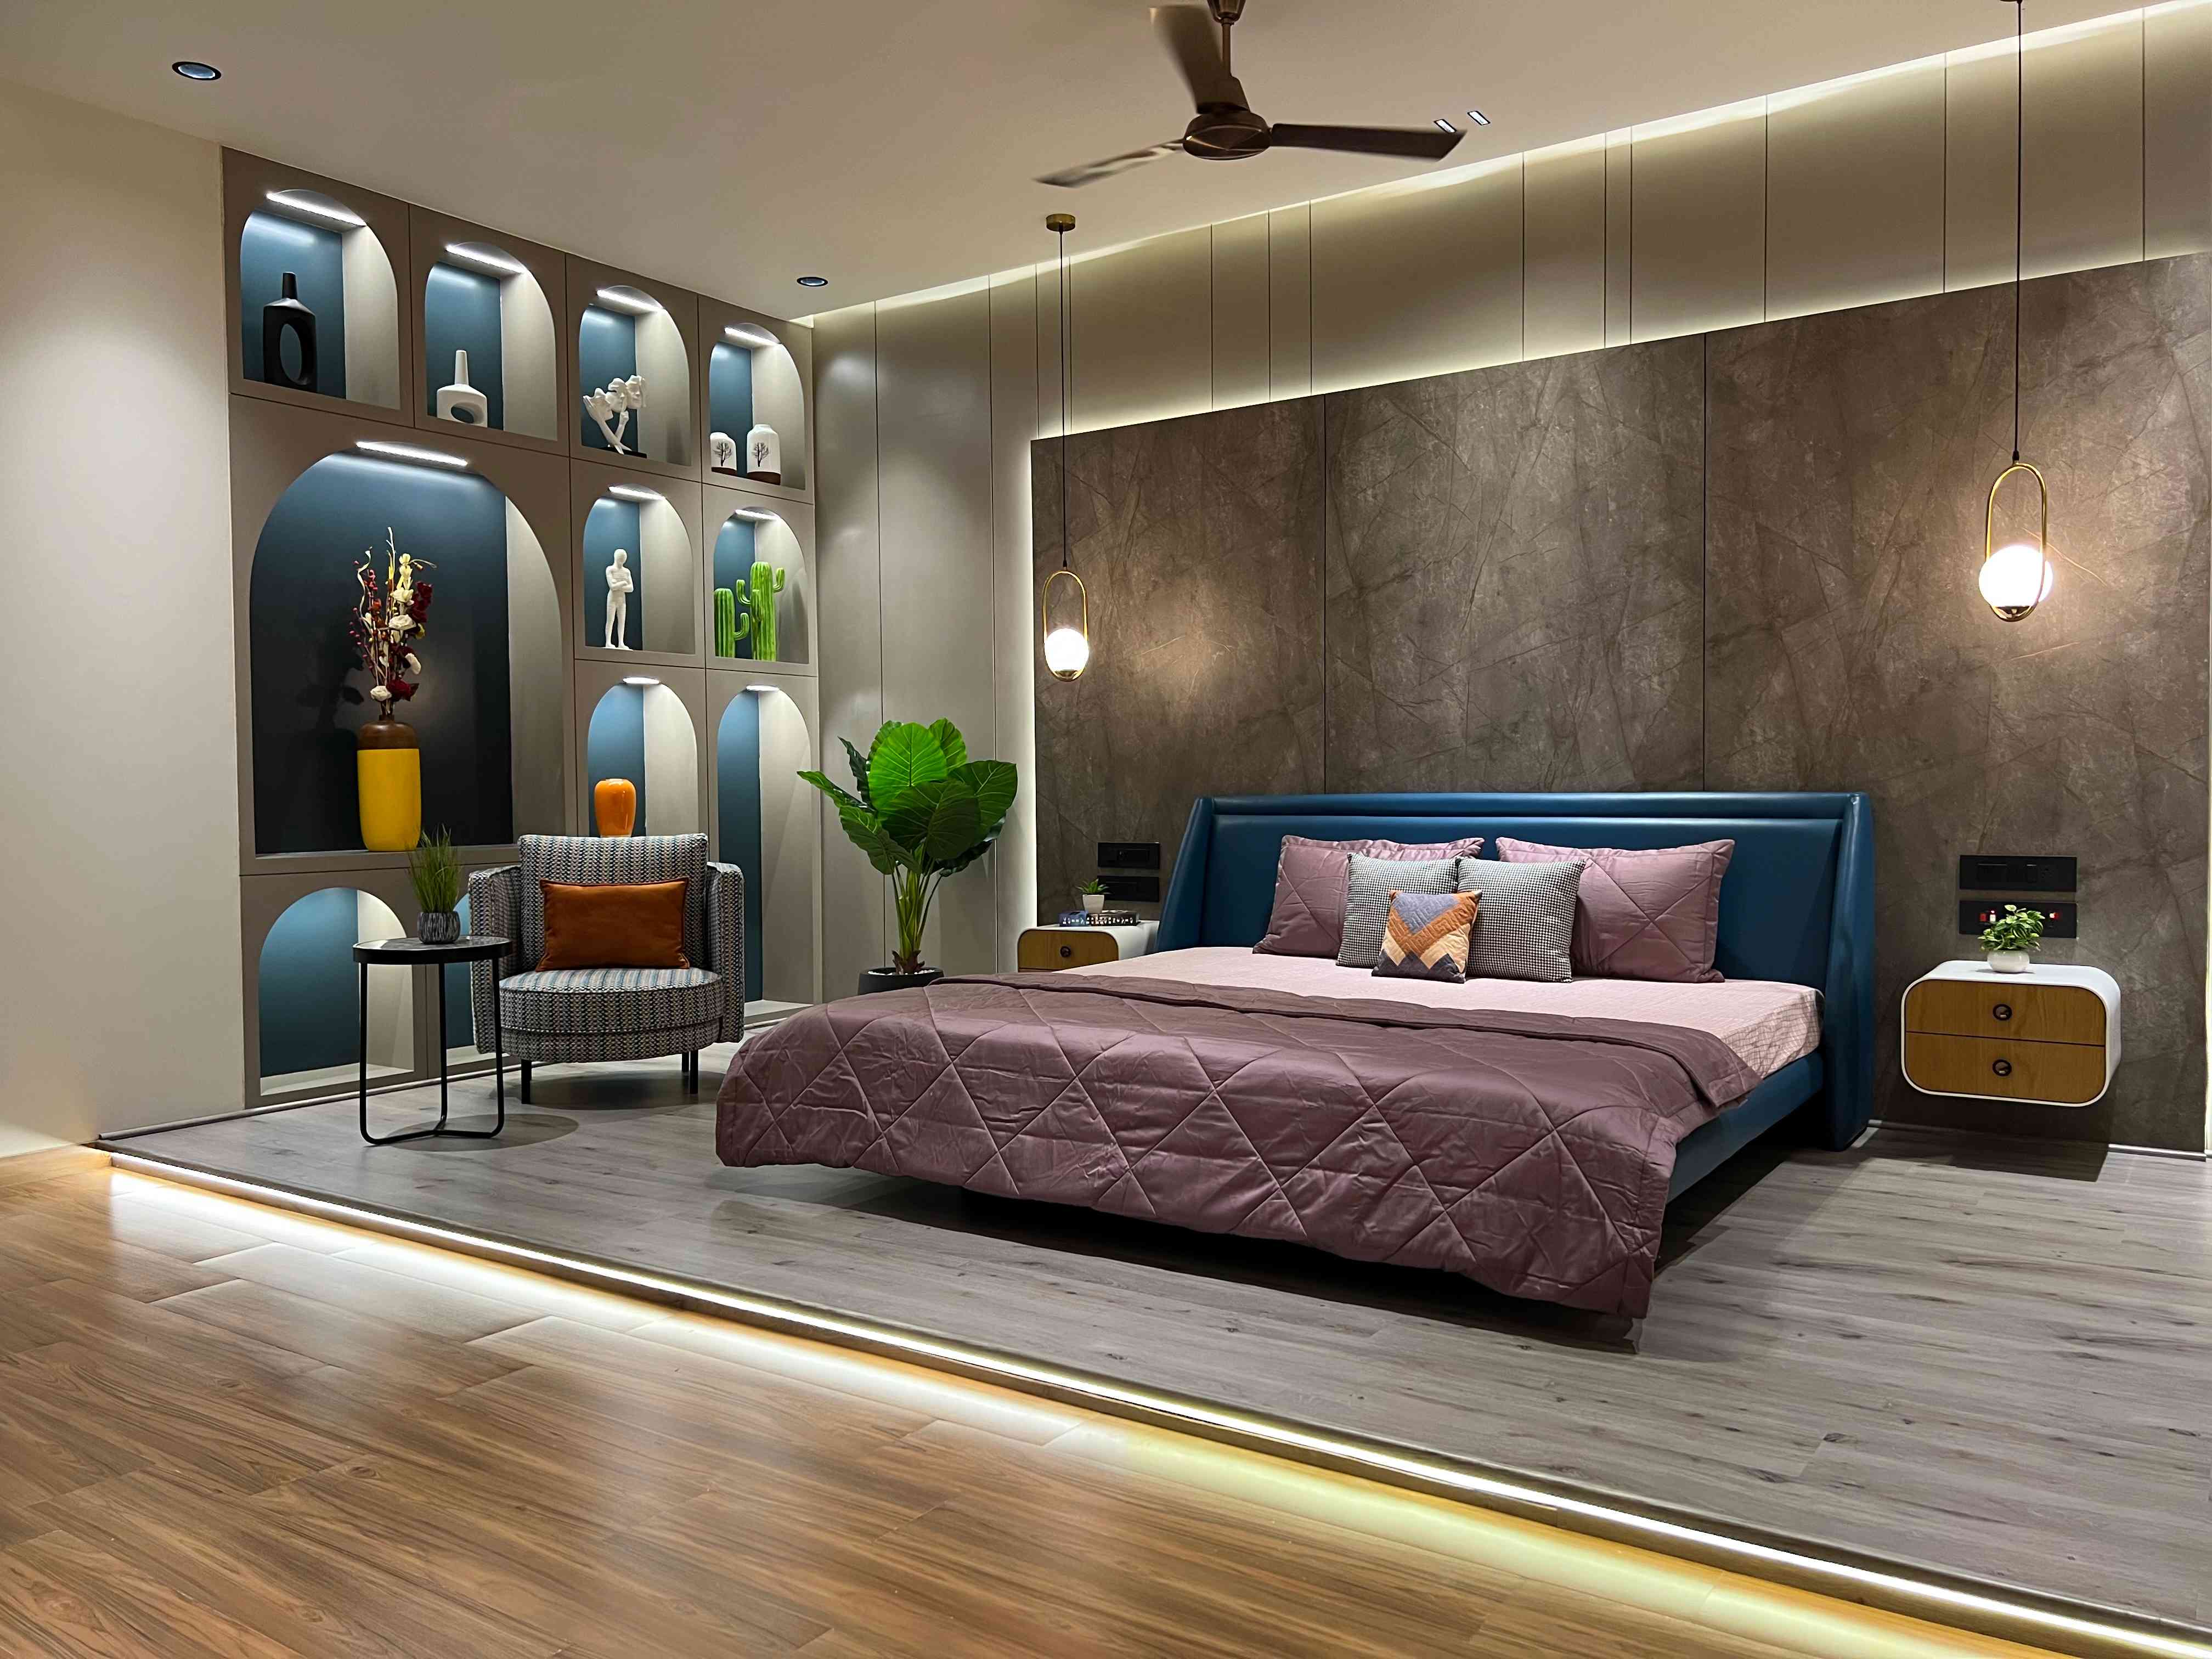 Contemporary Bedroom Design With Furniture And Designer Hanging Lights